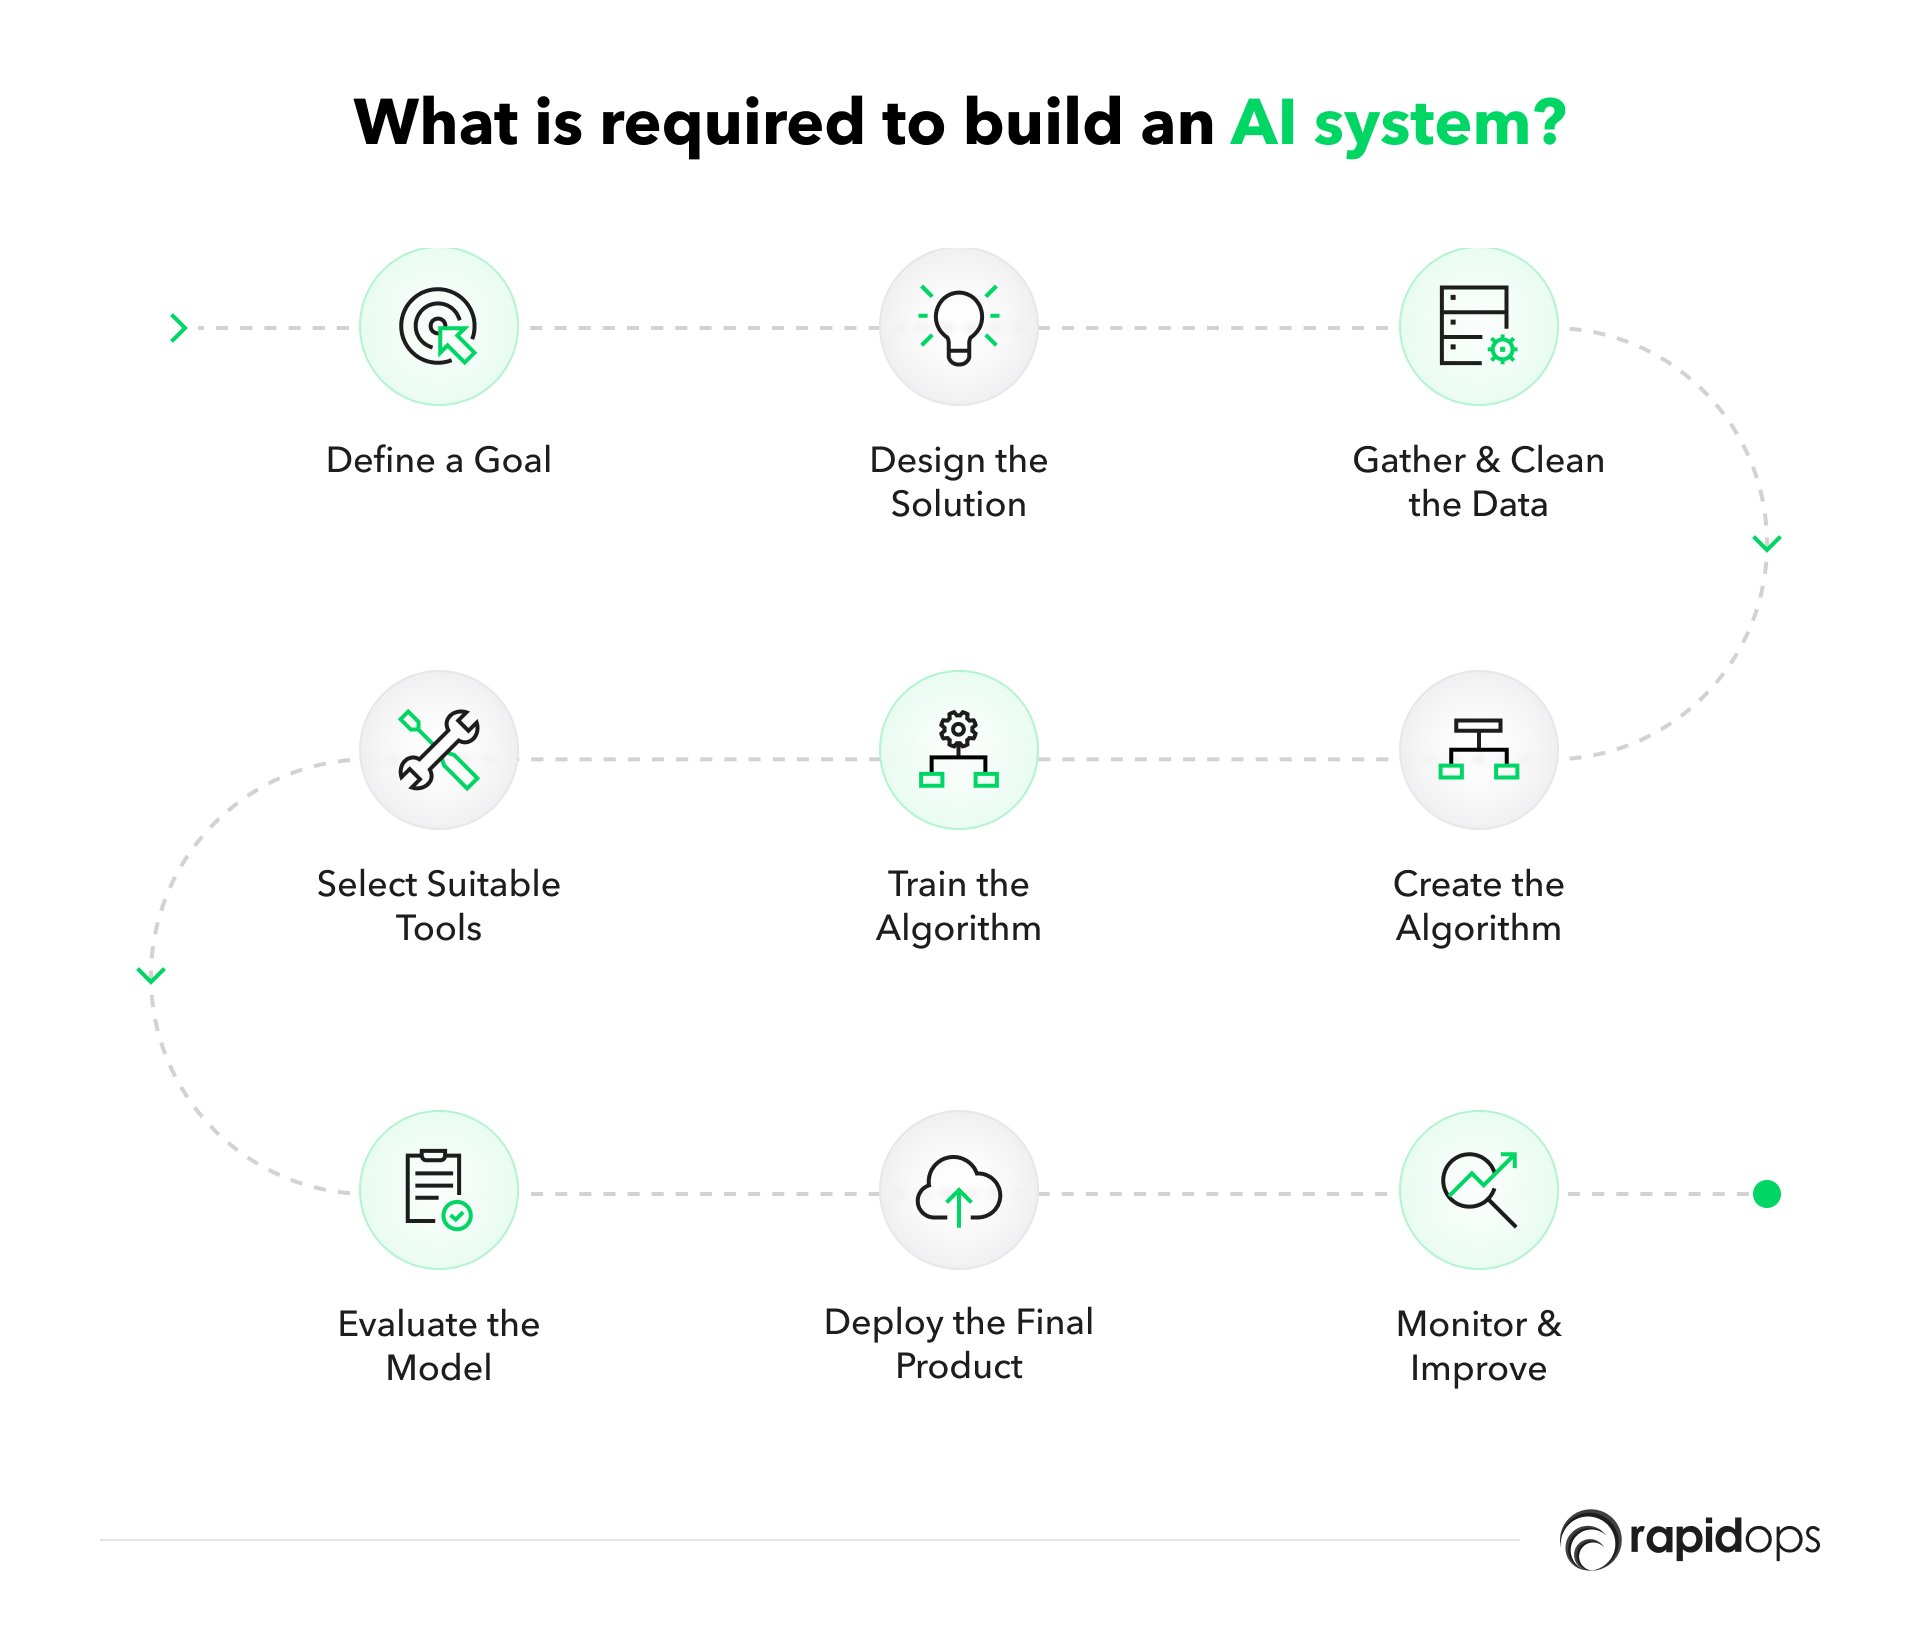 What is required to build an AI system?